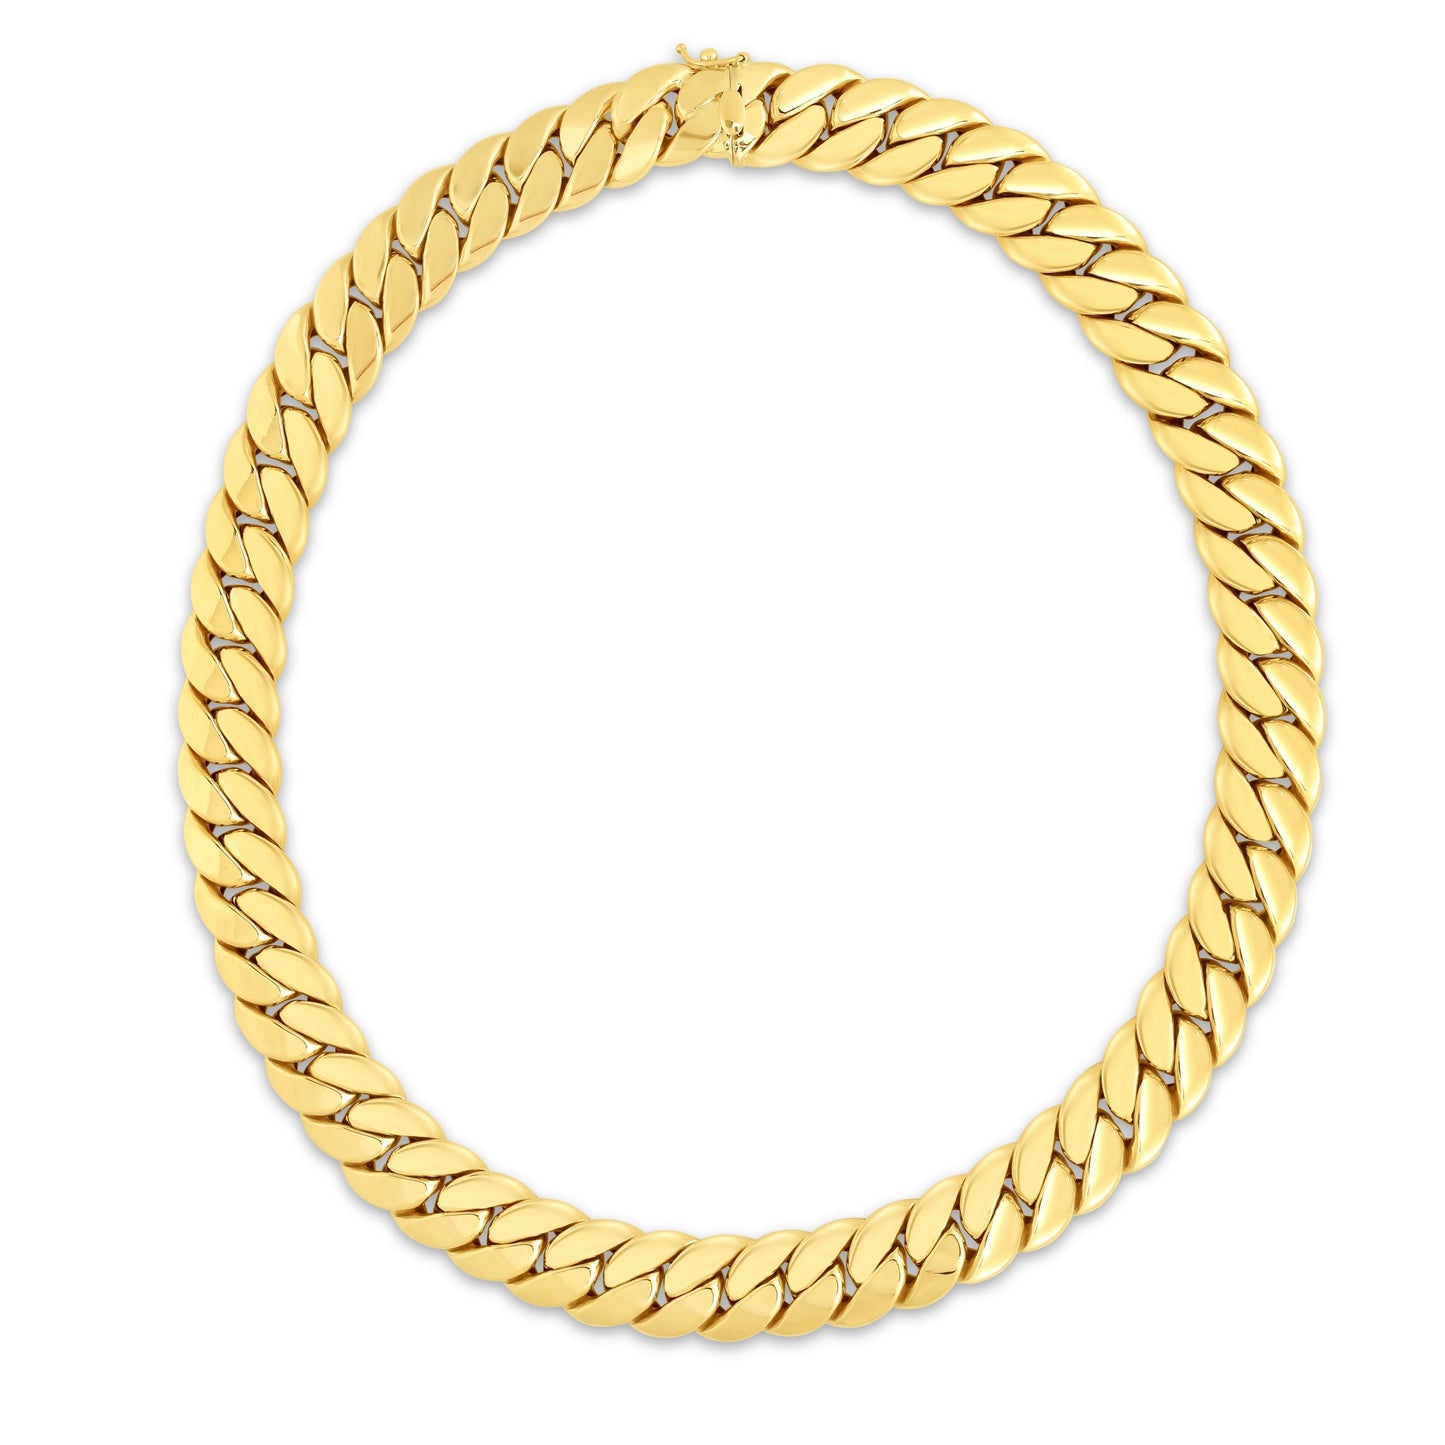 14K Gold 14mm Miami Cuban Necklace